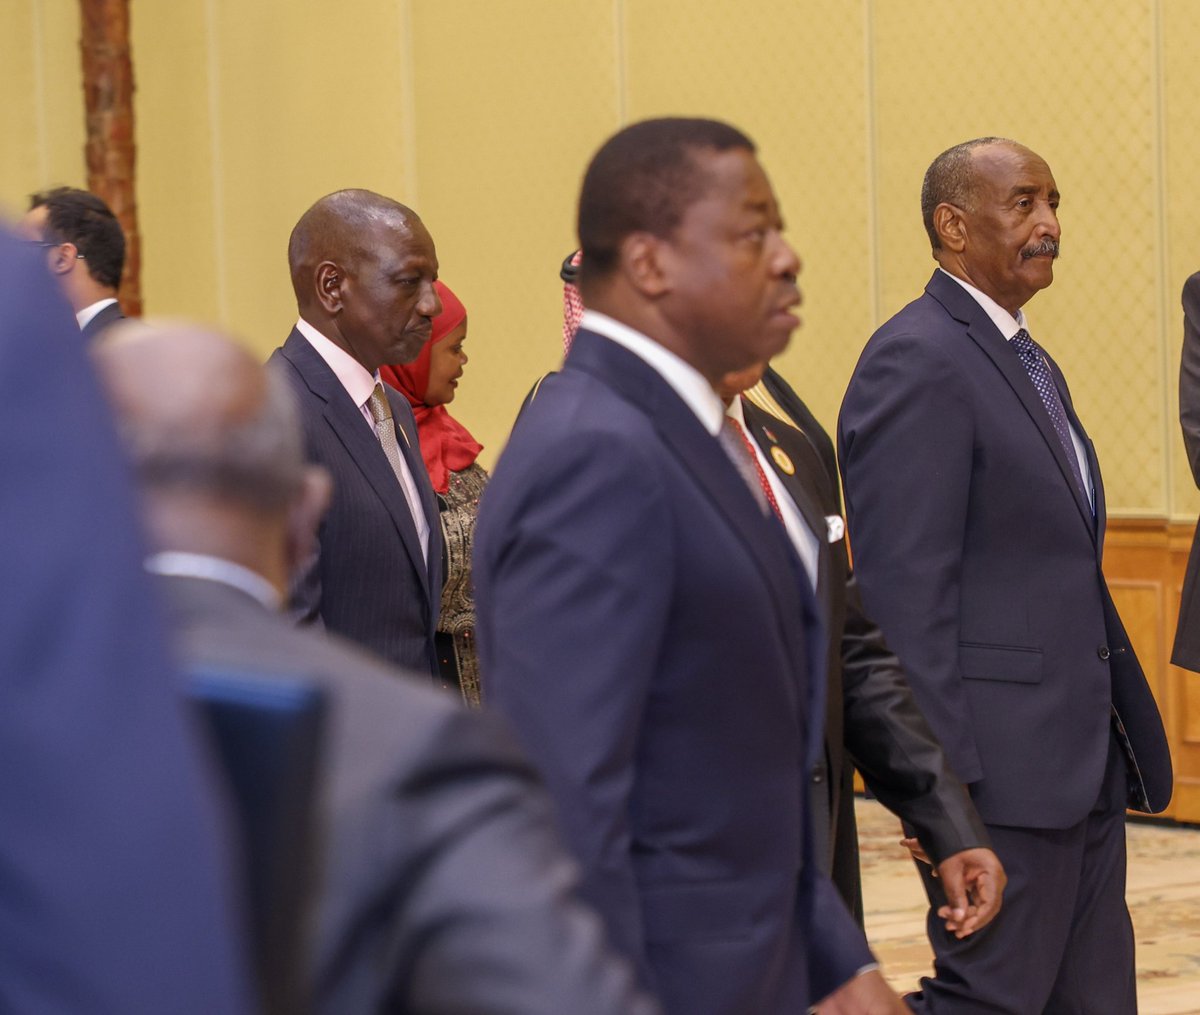 President Ruto among Heads of State attending the fifth Arab-Africa Summit in Riyadh, Saudi Arabia. He urged the Arab nations to explore opportunities in the African Continental Free Trade Area with Kenya as their gateway.